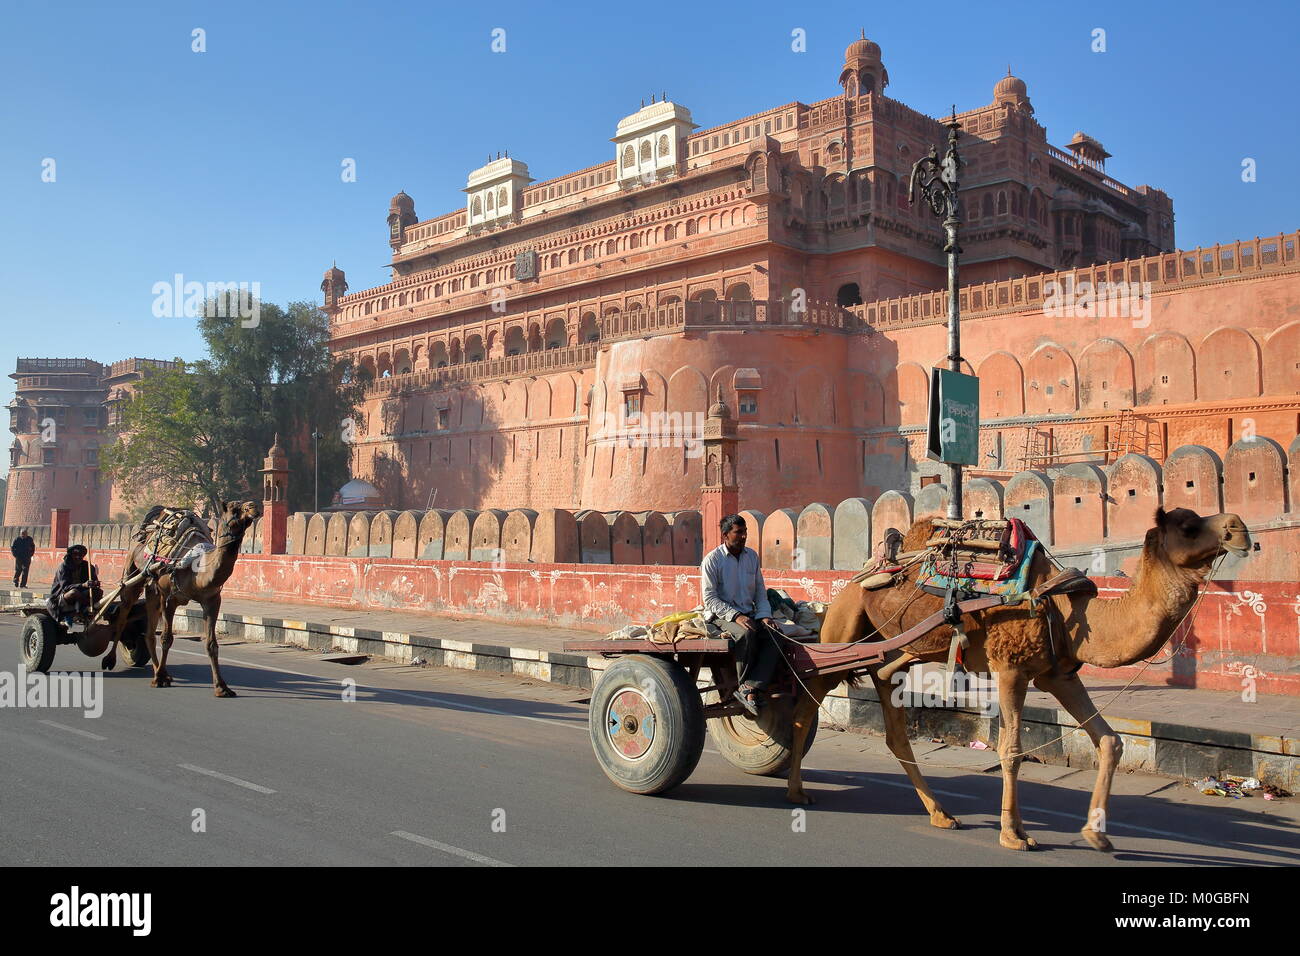 BIKANER, RAJASTHAN, INDIA - DECEMBER 23, 2017: 2 carriages with camels in front of Junagarh Fort Stock Photo